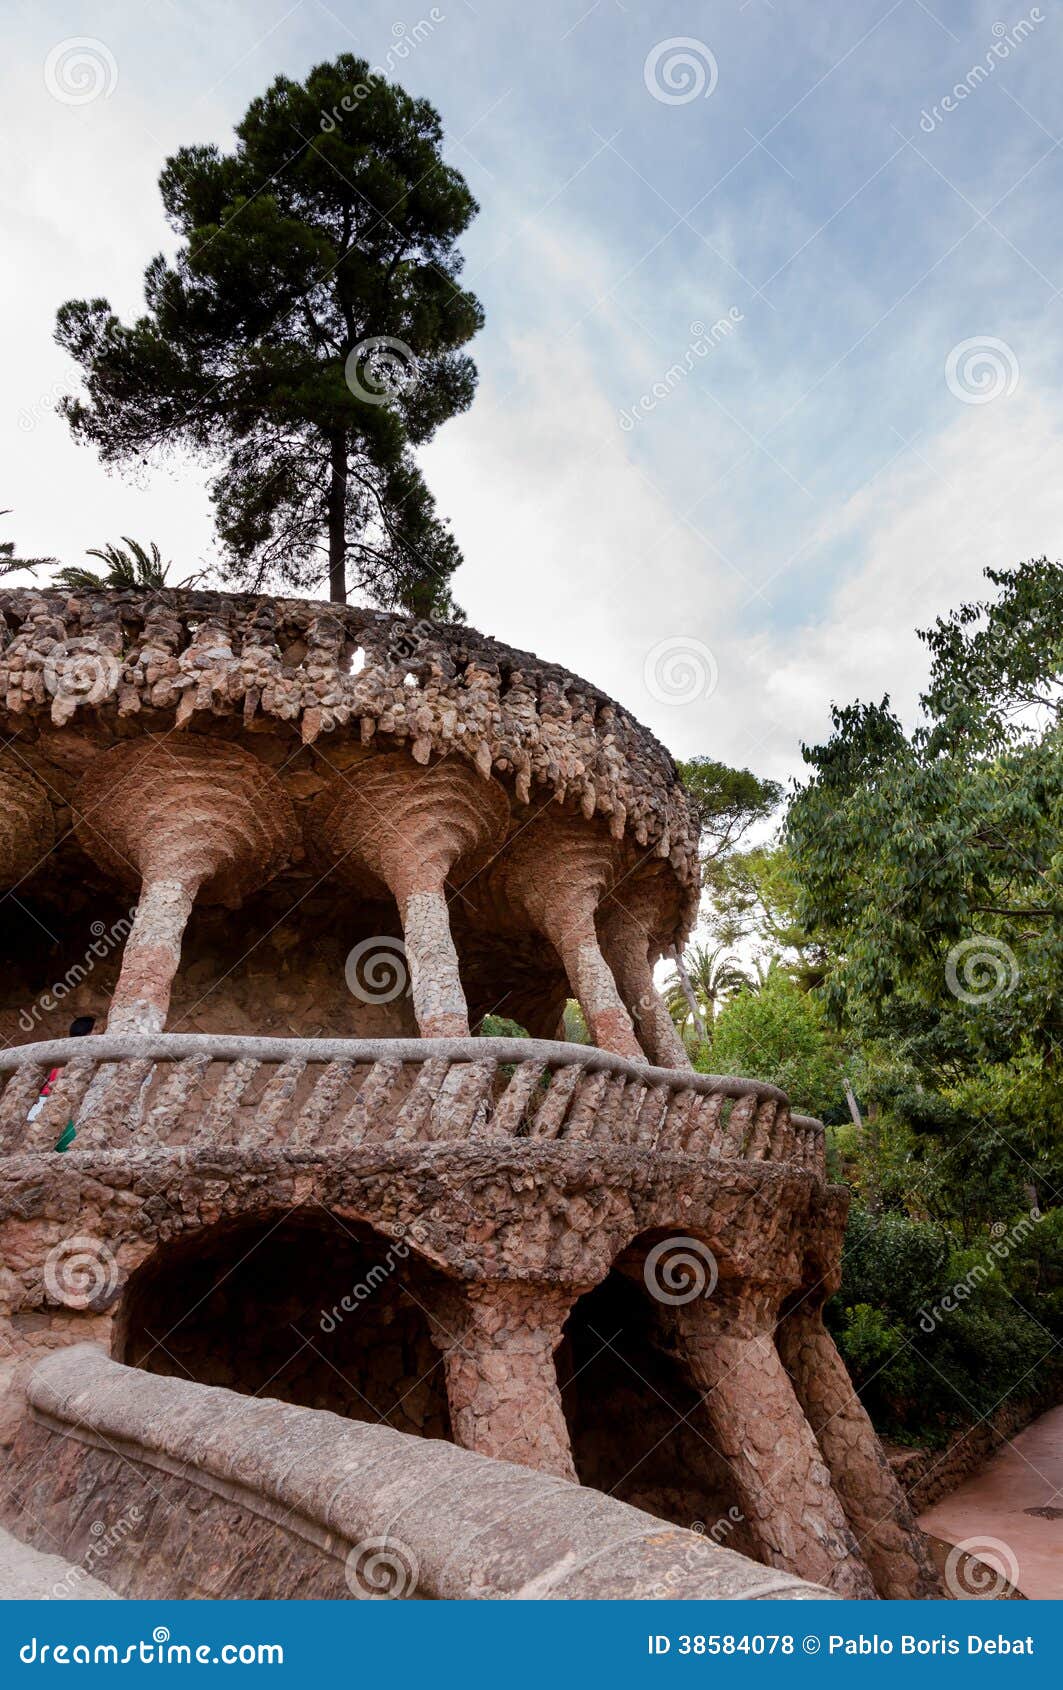 viaducto and tree in park guell at barcelona